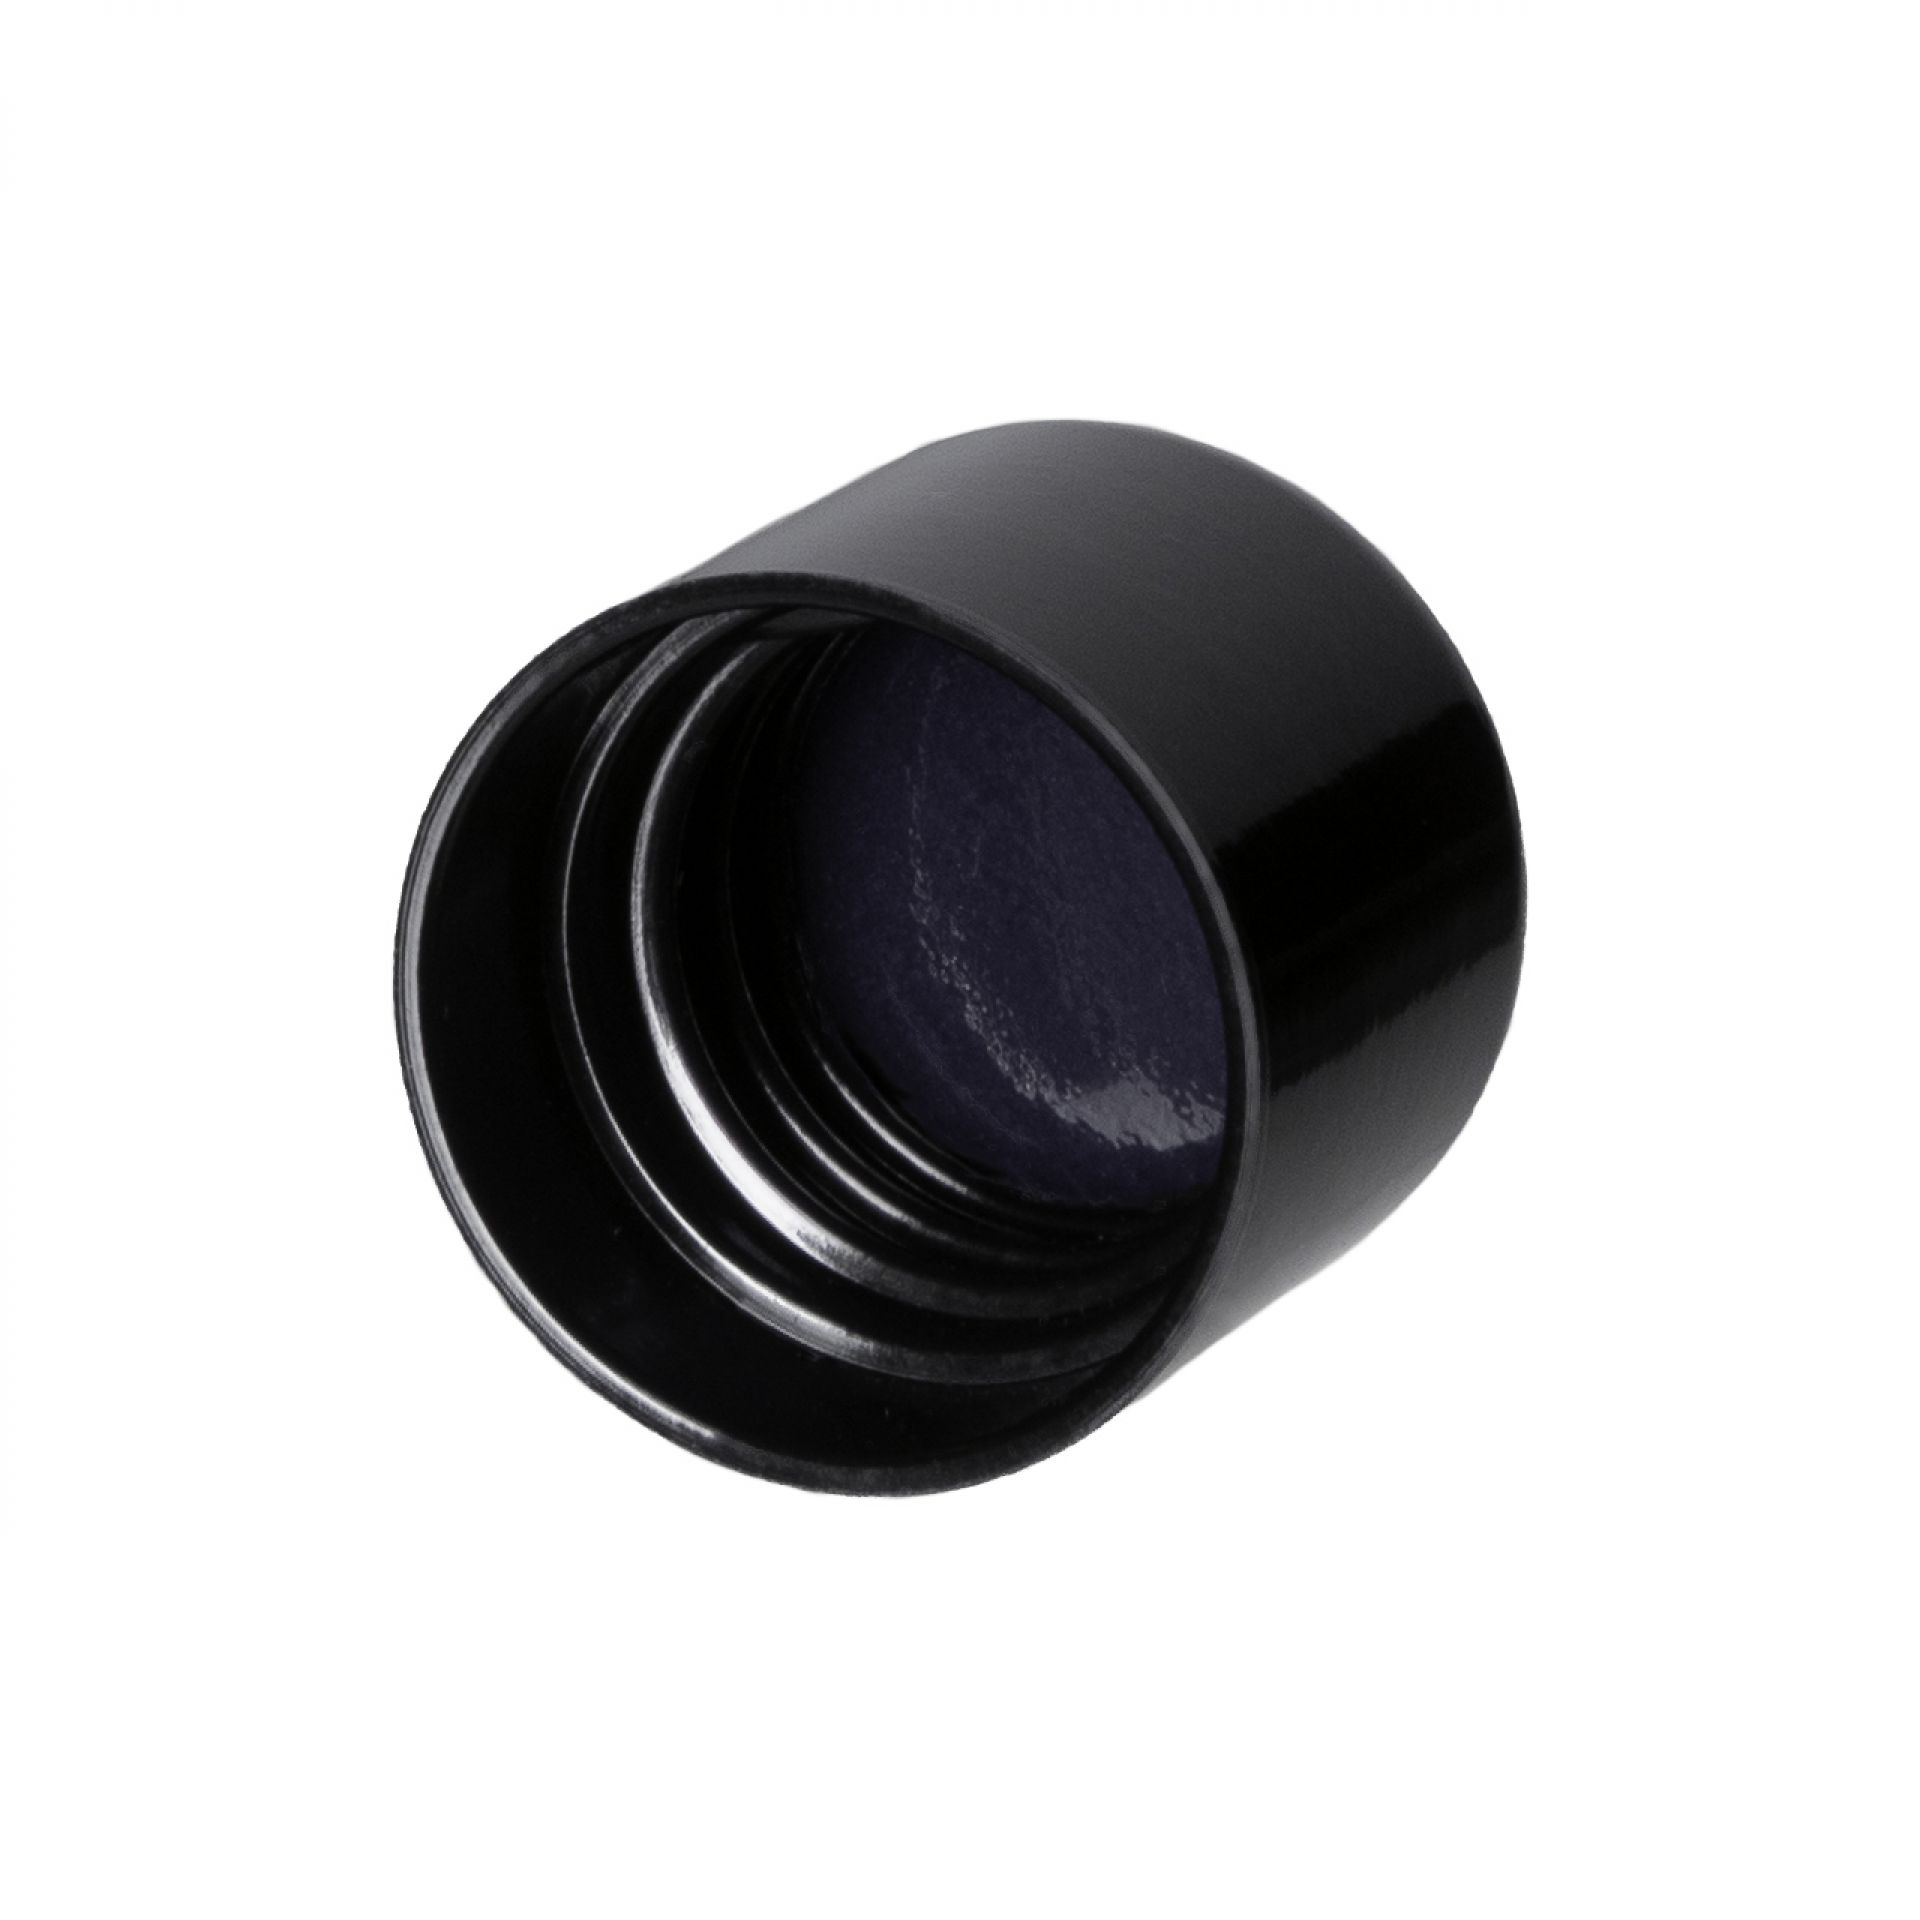 Screw cap DIN18, Urea, black, semi-glossy finish with violet Phan inlay for dropper bottles